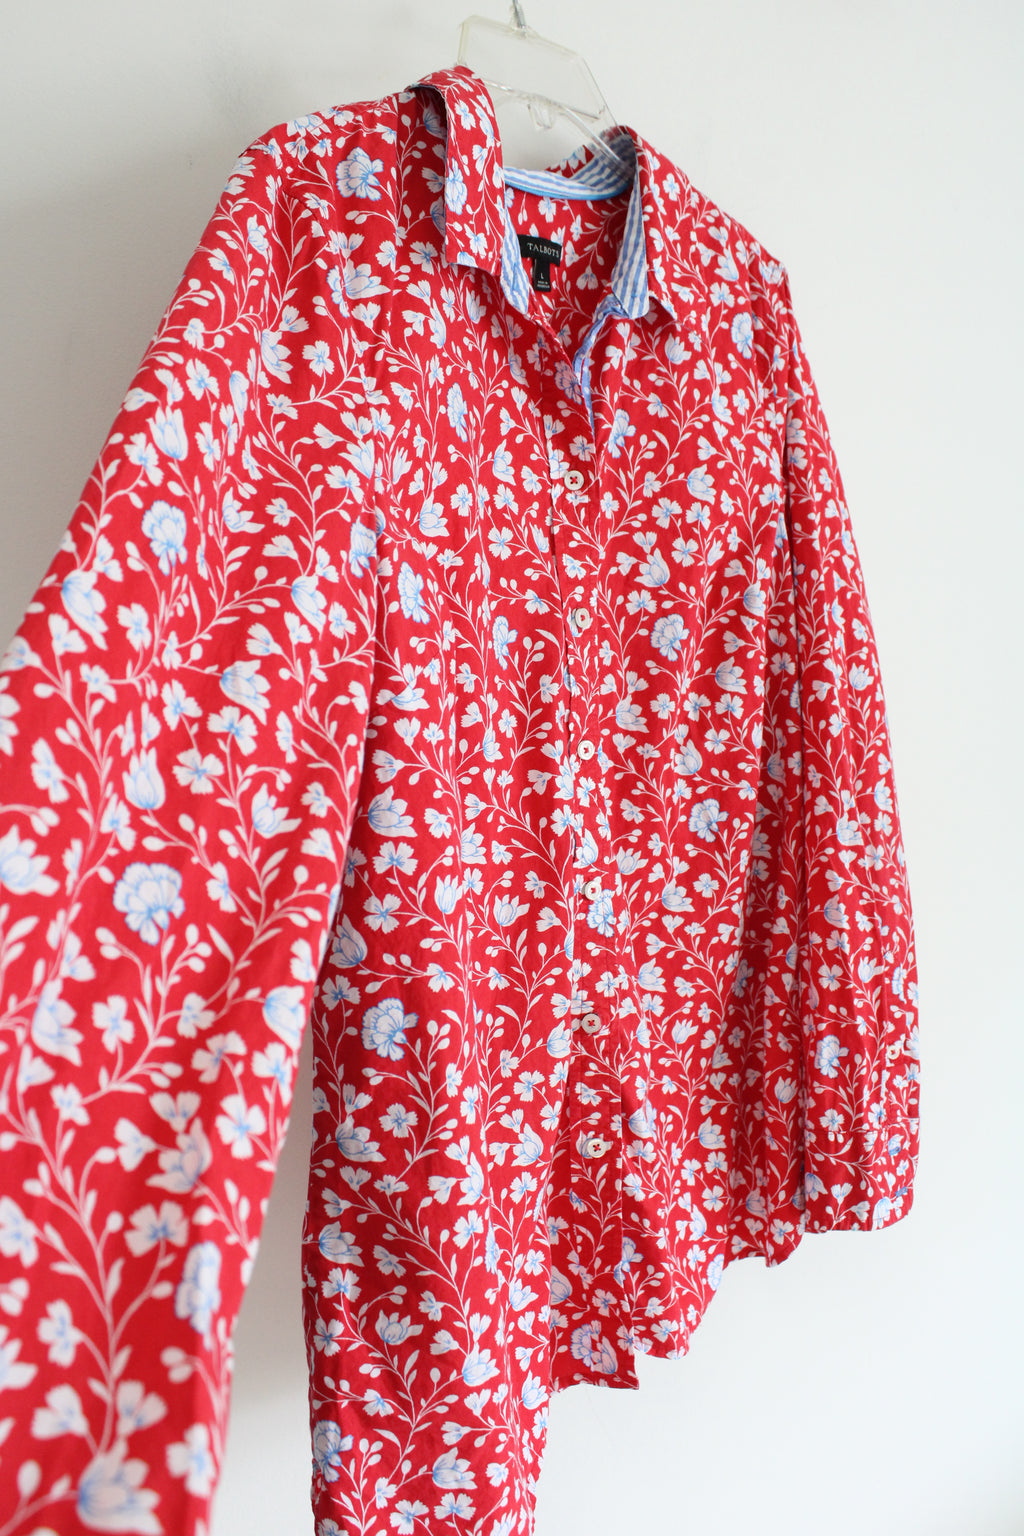 Talbots Red White Floral Button Down Shirt | L